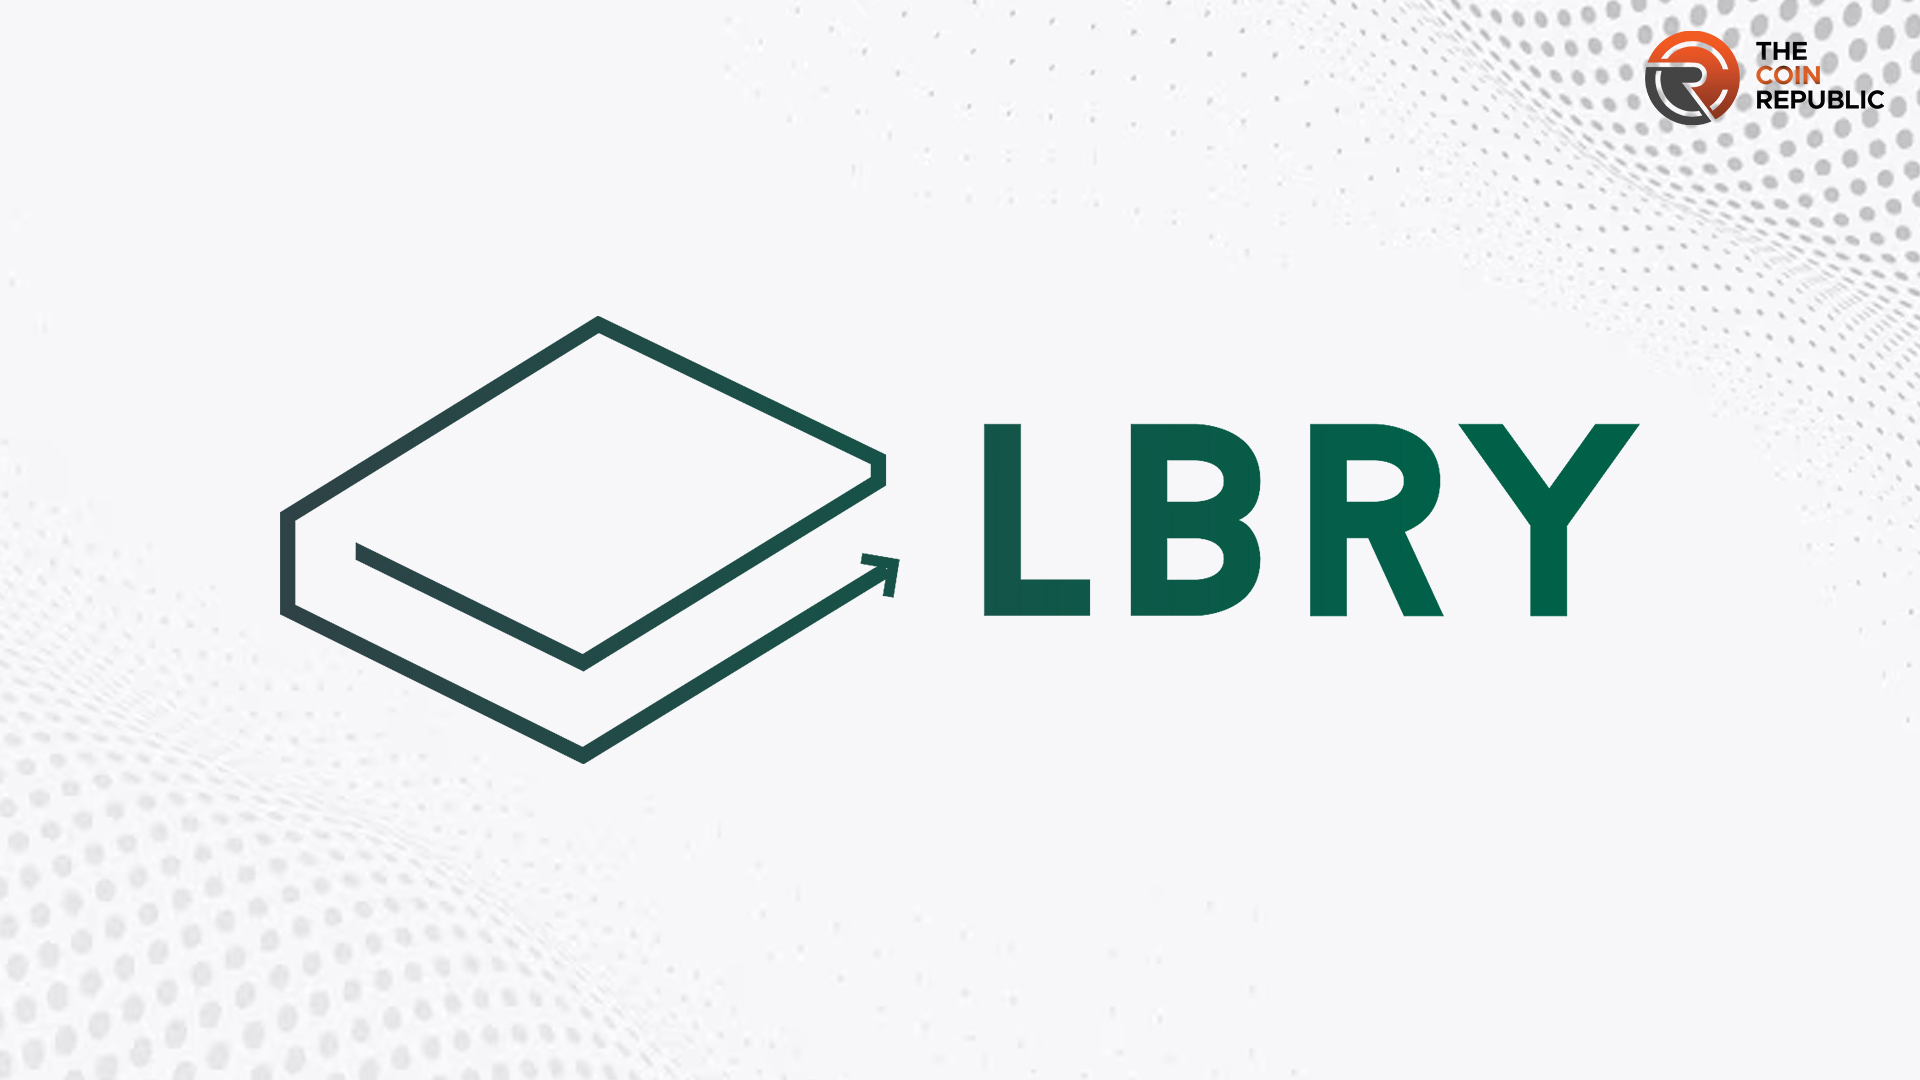 Battle of SEC vs LBRY Ends With the Latter Admitting Defeat